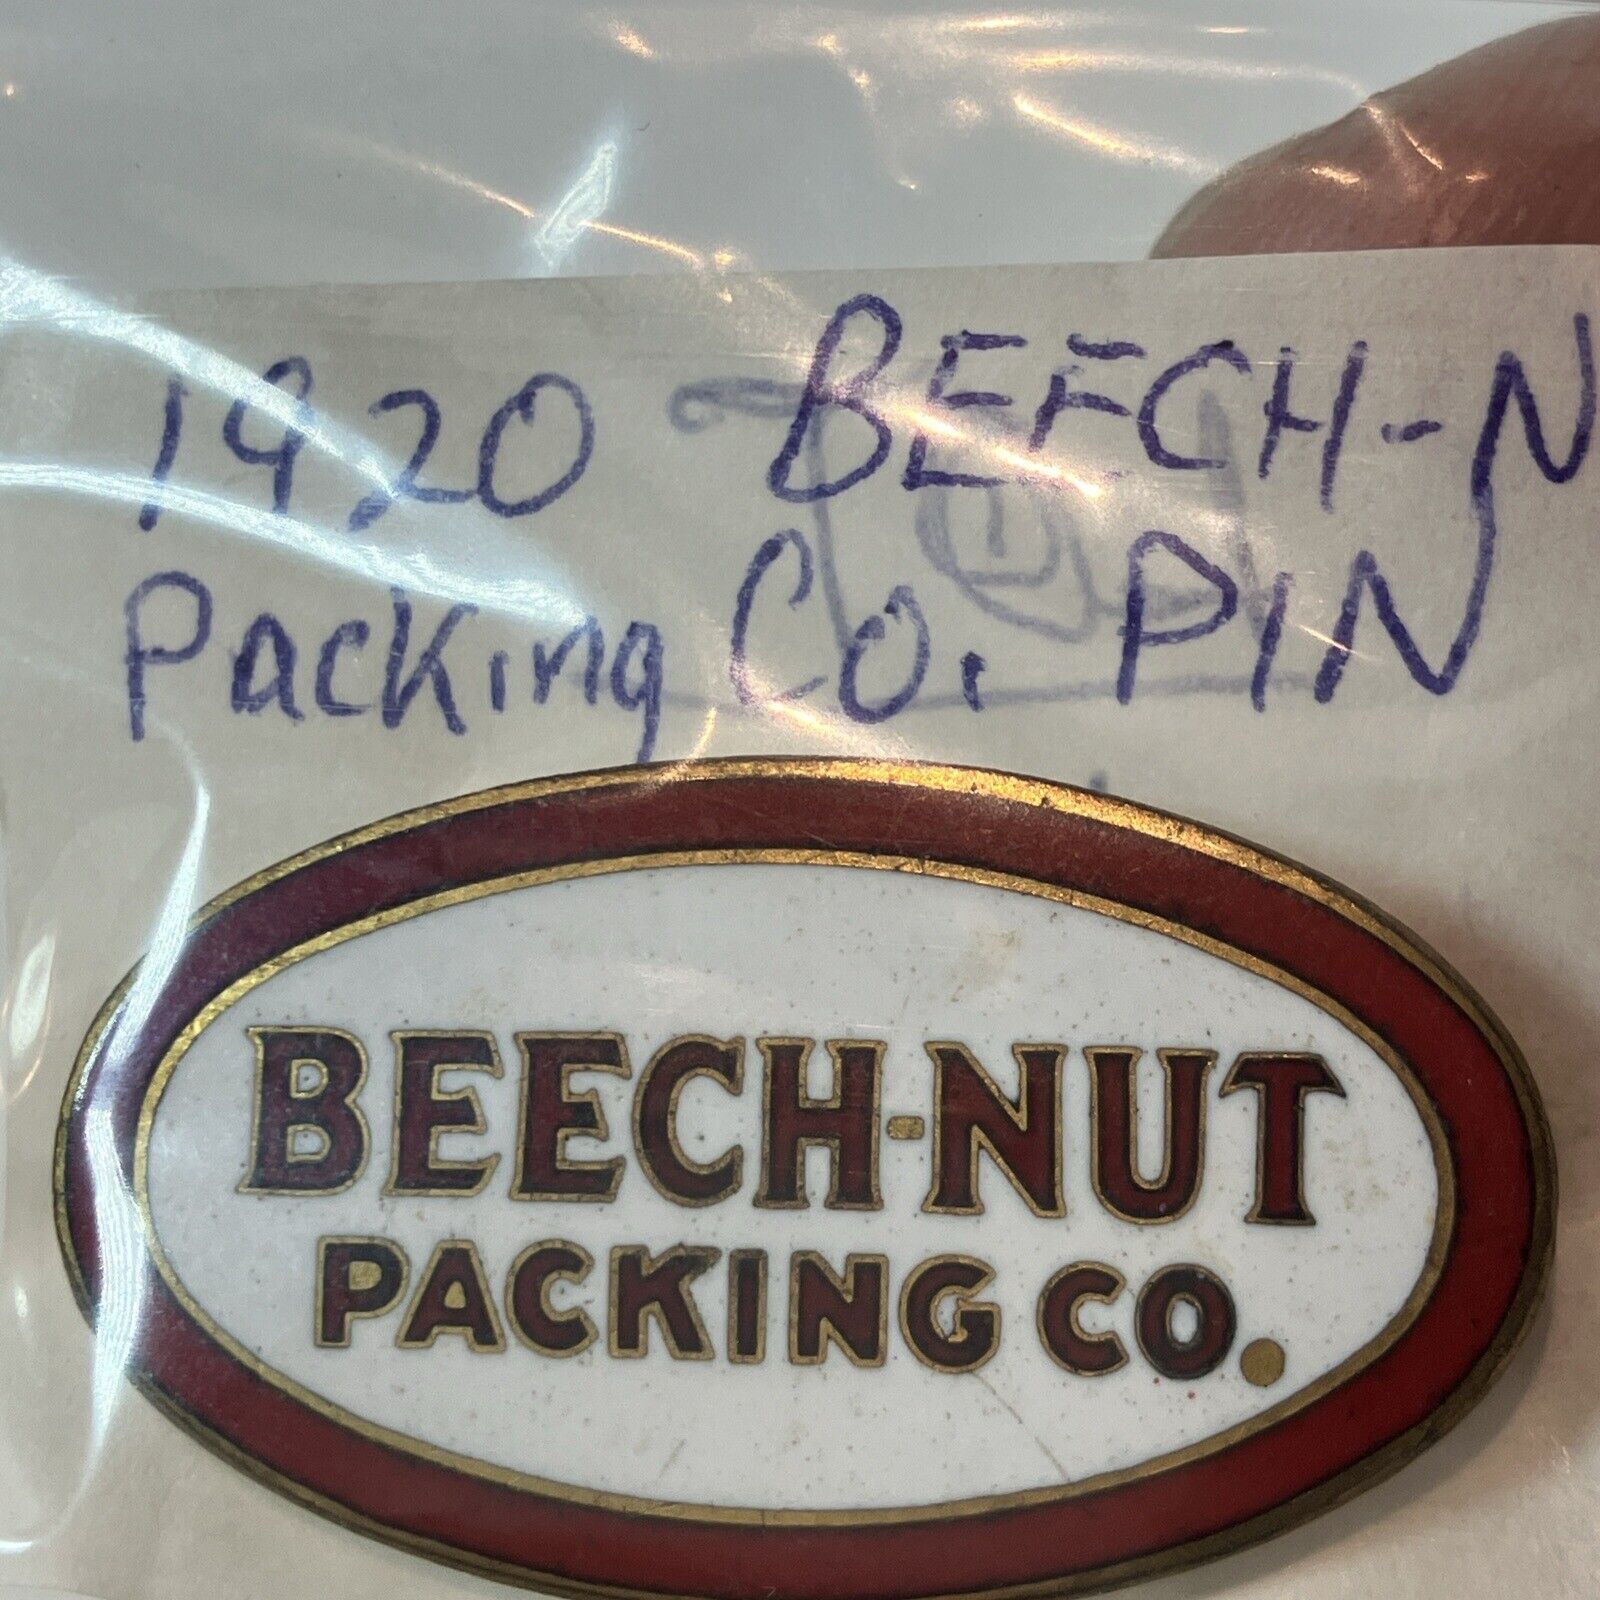 1920’s BEECH-NUT PACKING CO. Pin ANTIQUE BADGE